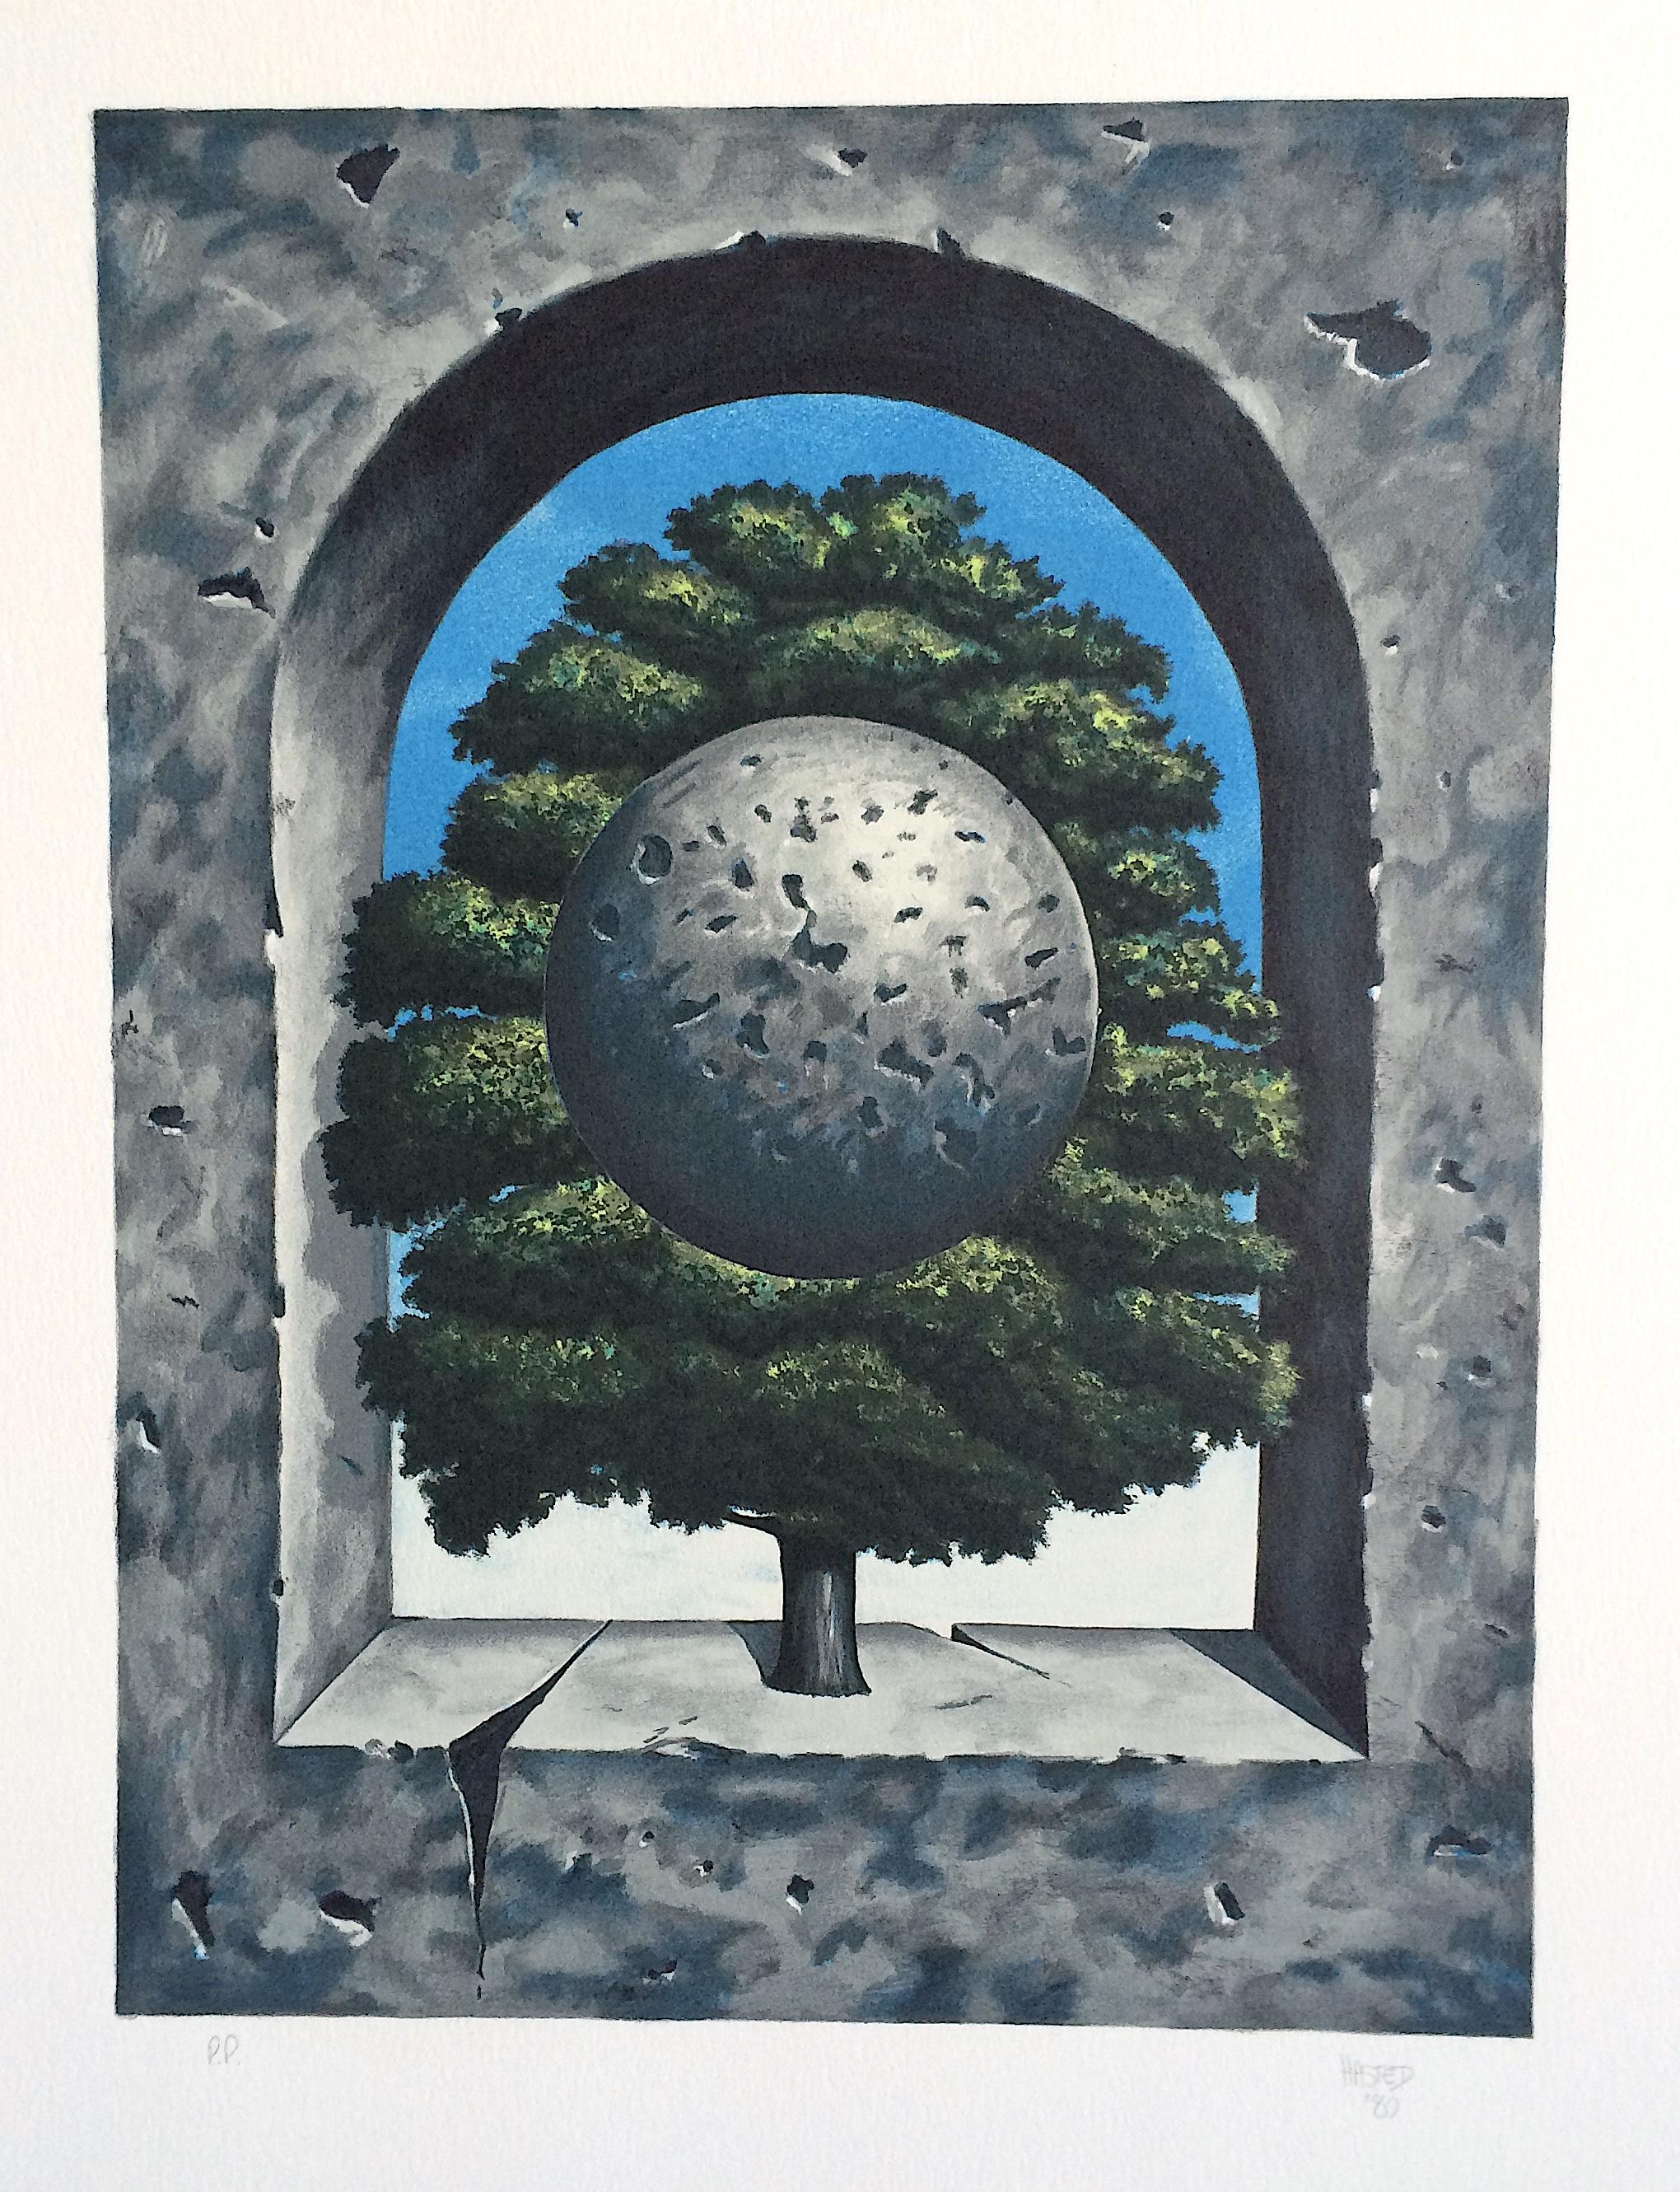 A POINT OF HONOR Hand Drawn Lithograph, Surrealist Tree, Blue Sky, Concrete Arch